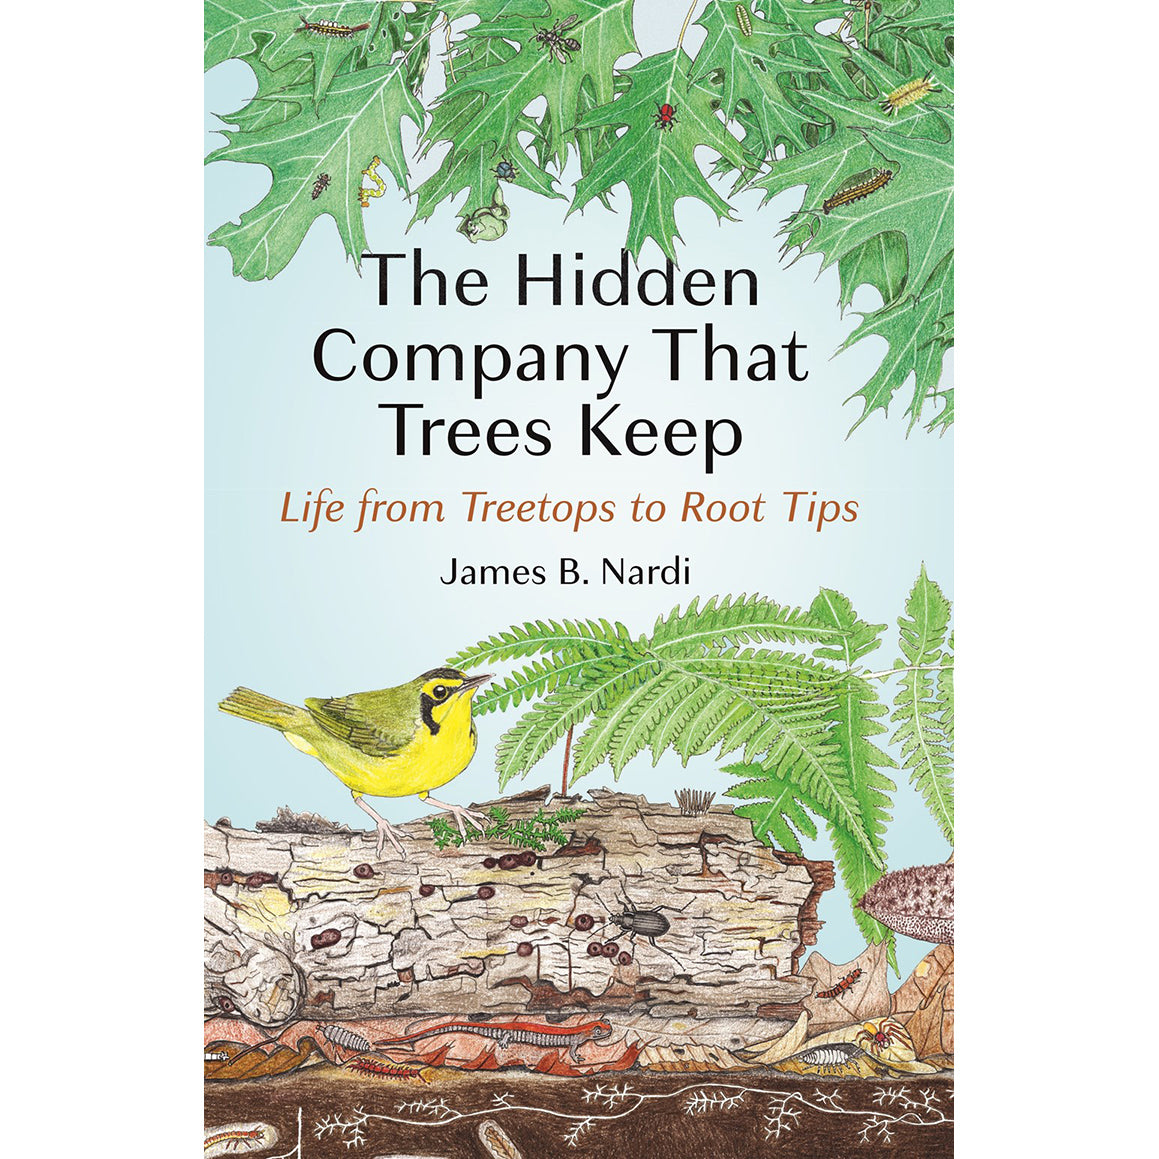 The Hidden Company that Trees Keep